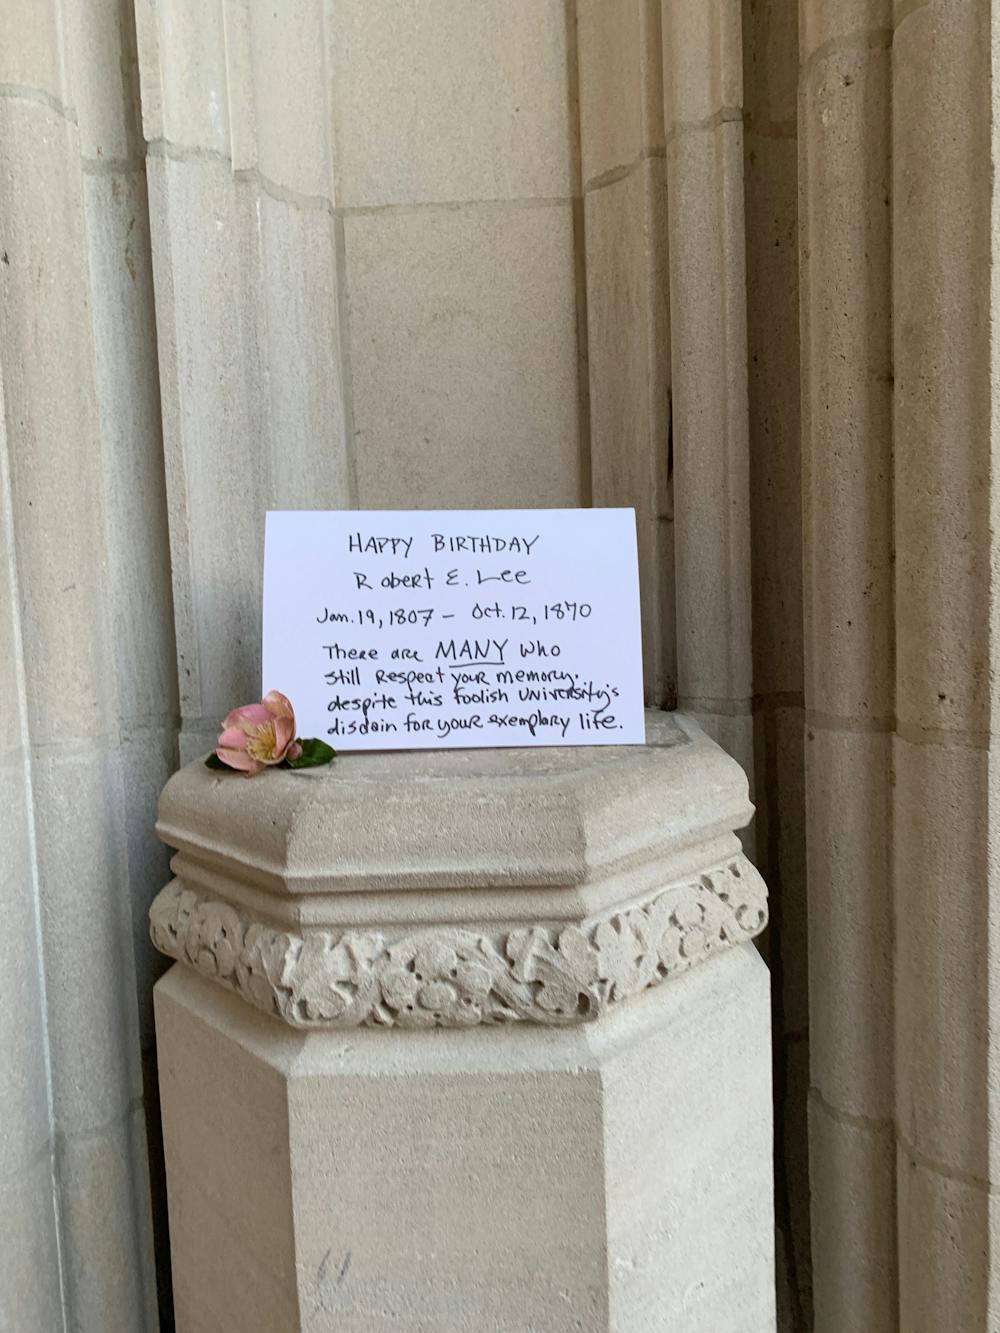 Happy birthday” note to Robert E. Lee found outside of Chapel - The  Chronicle